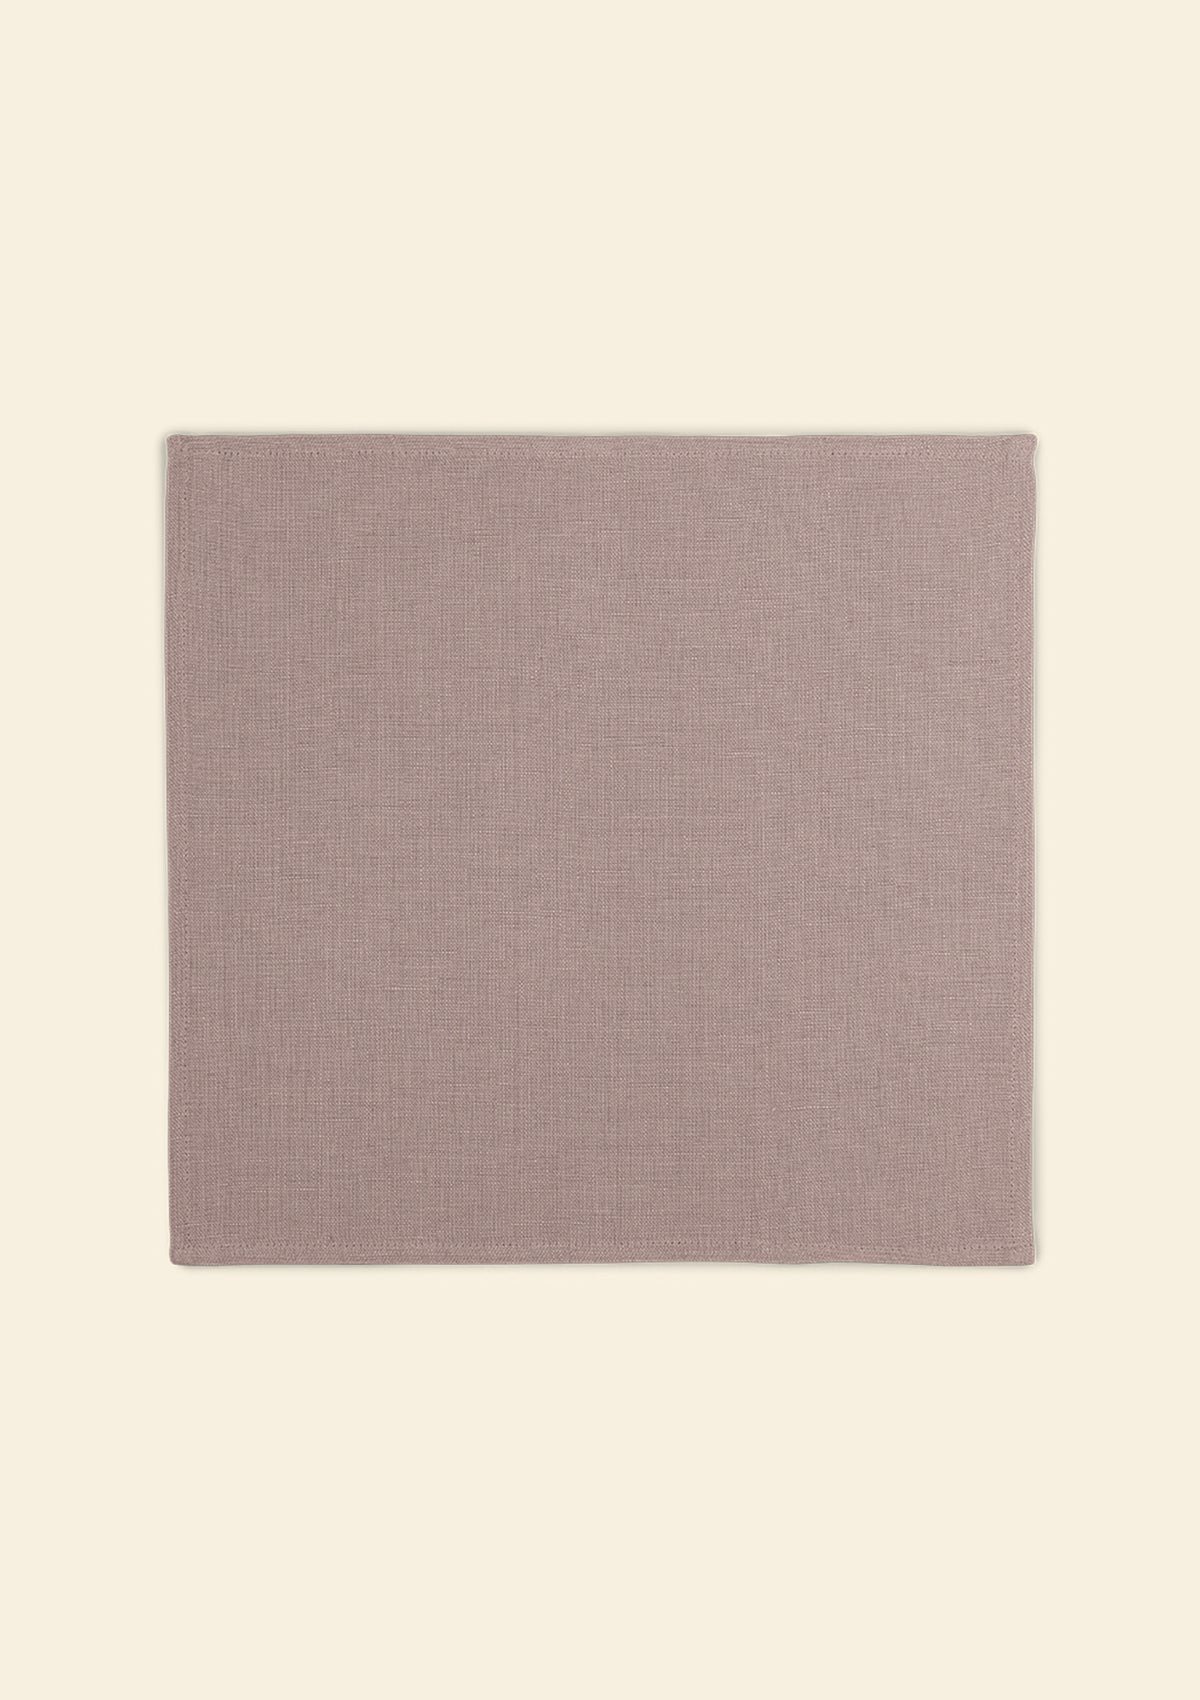 The Old pink linen napkin